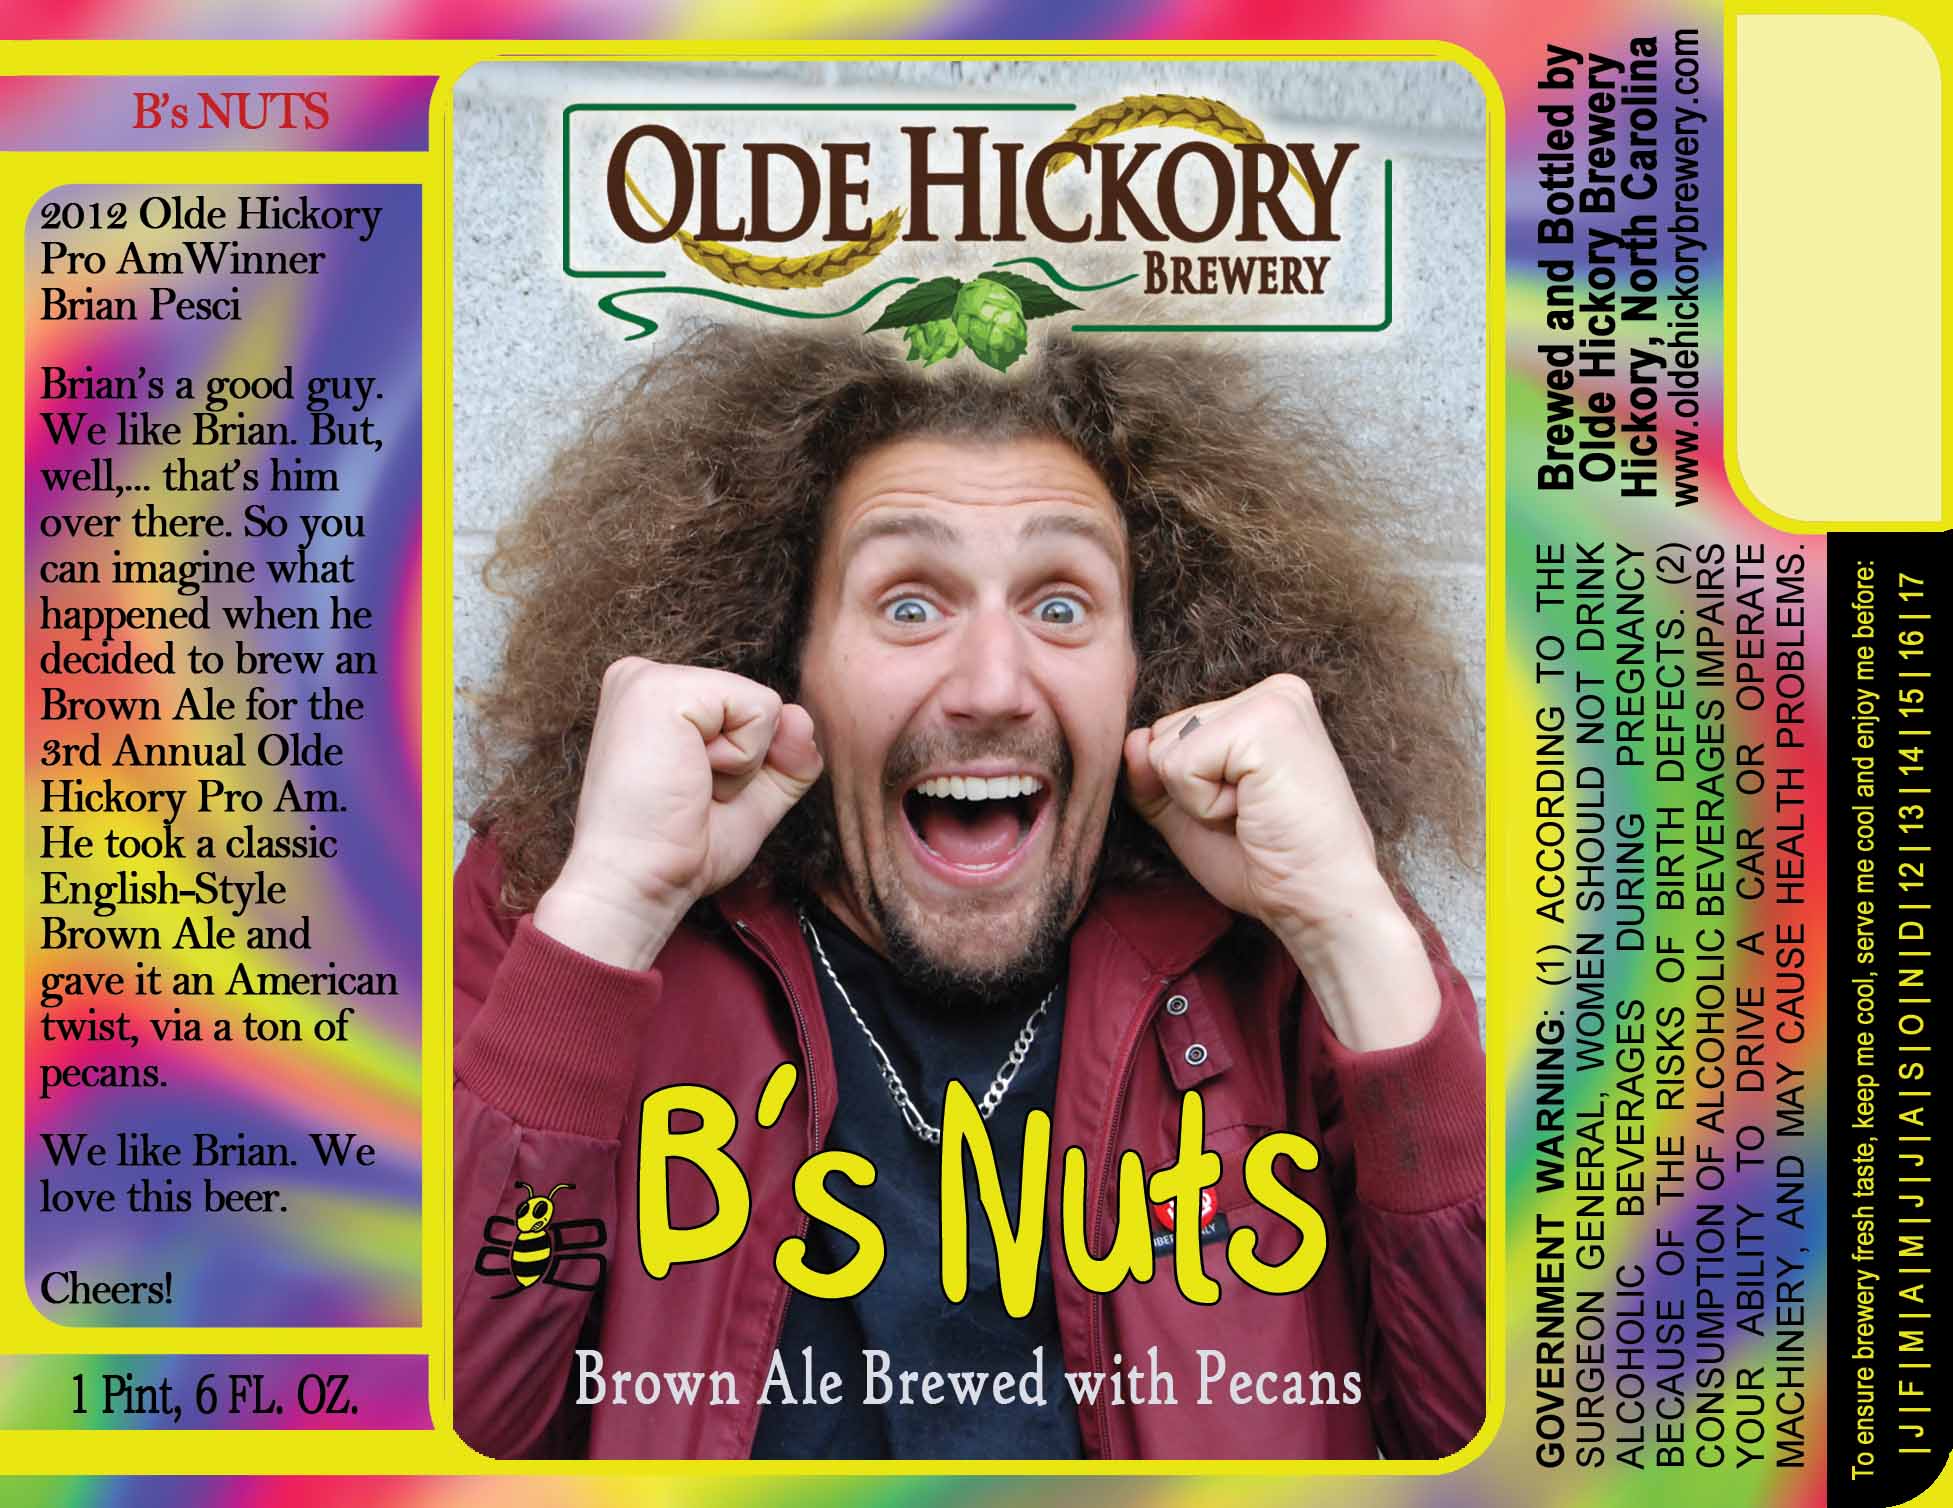 Olde Hickory B's Nuts